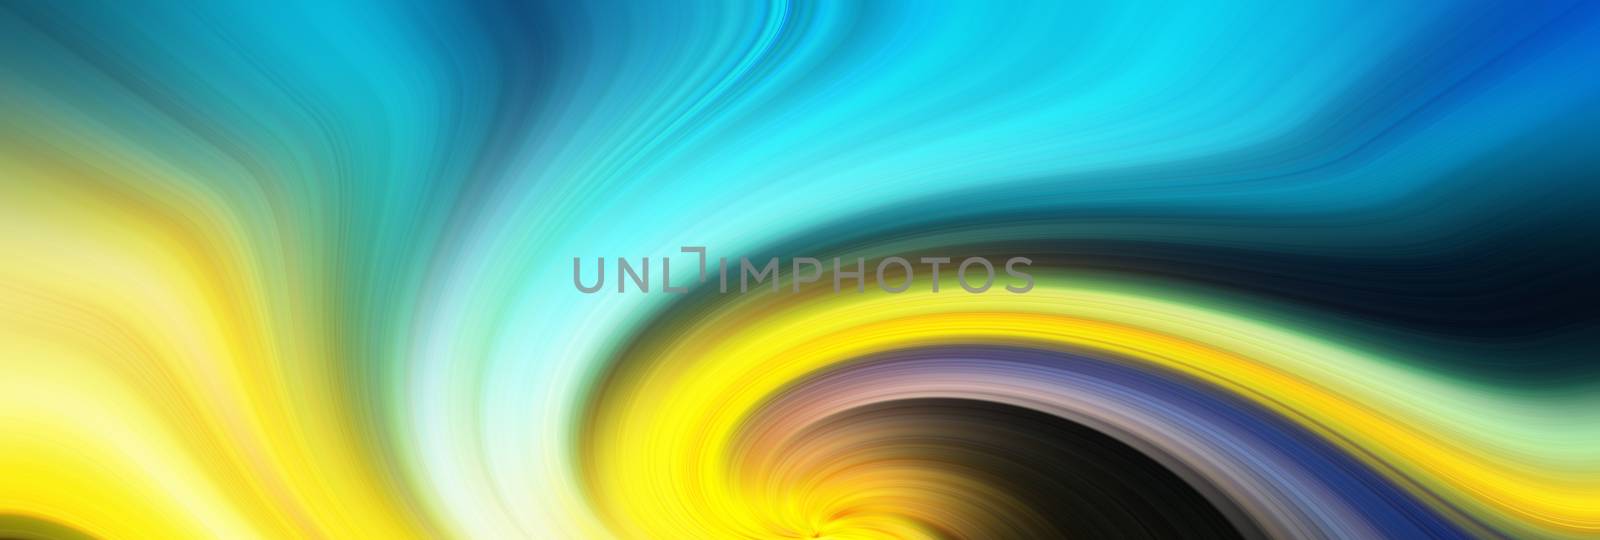 abstract digital background / texture design